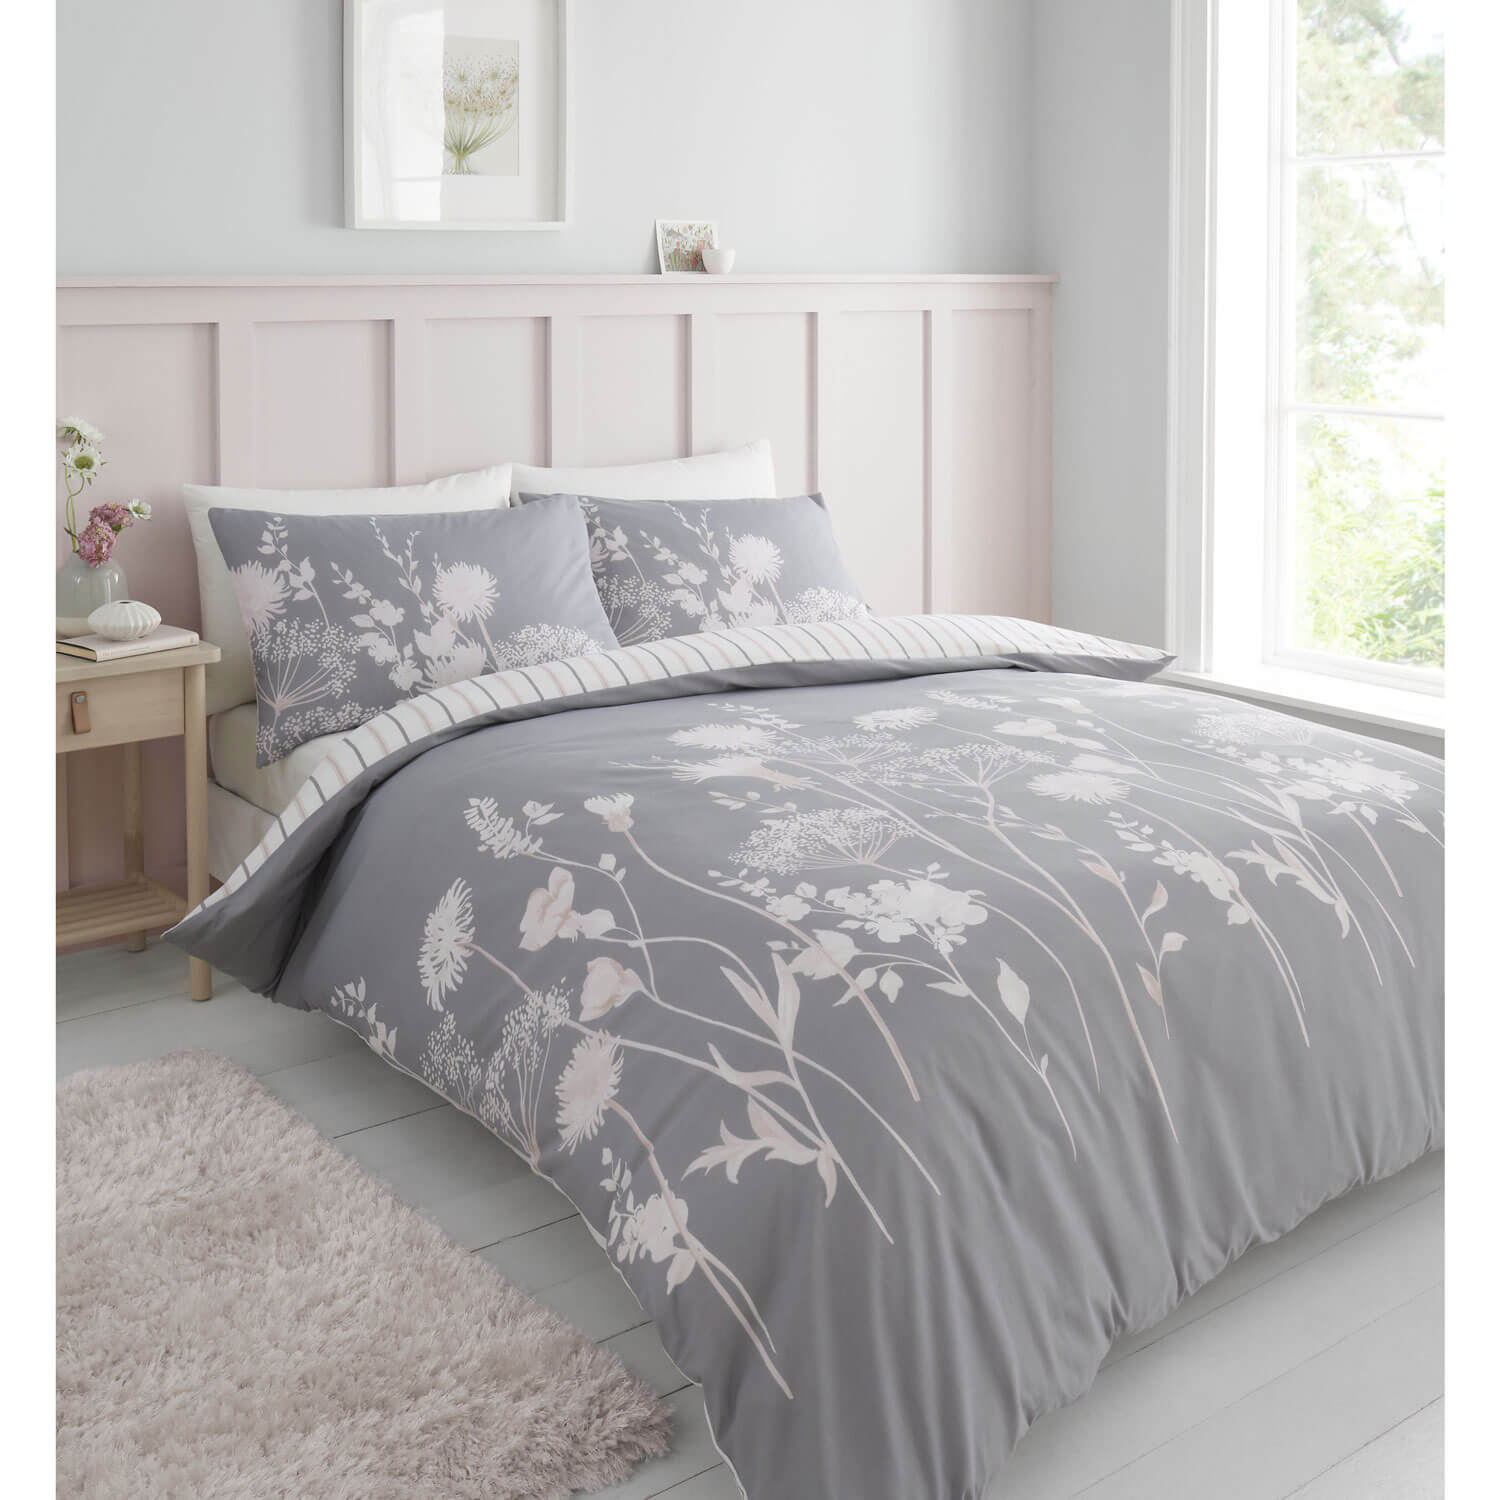  The Home Collection Meadowsweet Floral Duvet Cover Set - Super King 2 Shaws Department Stores